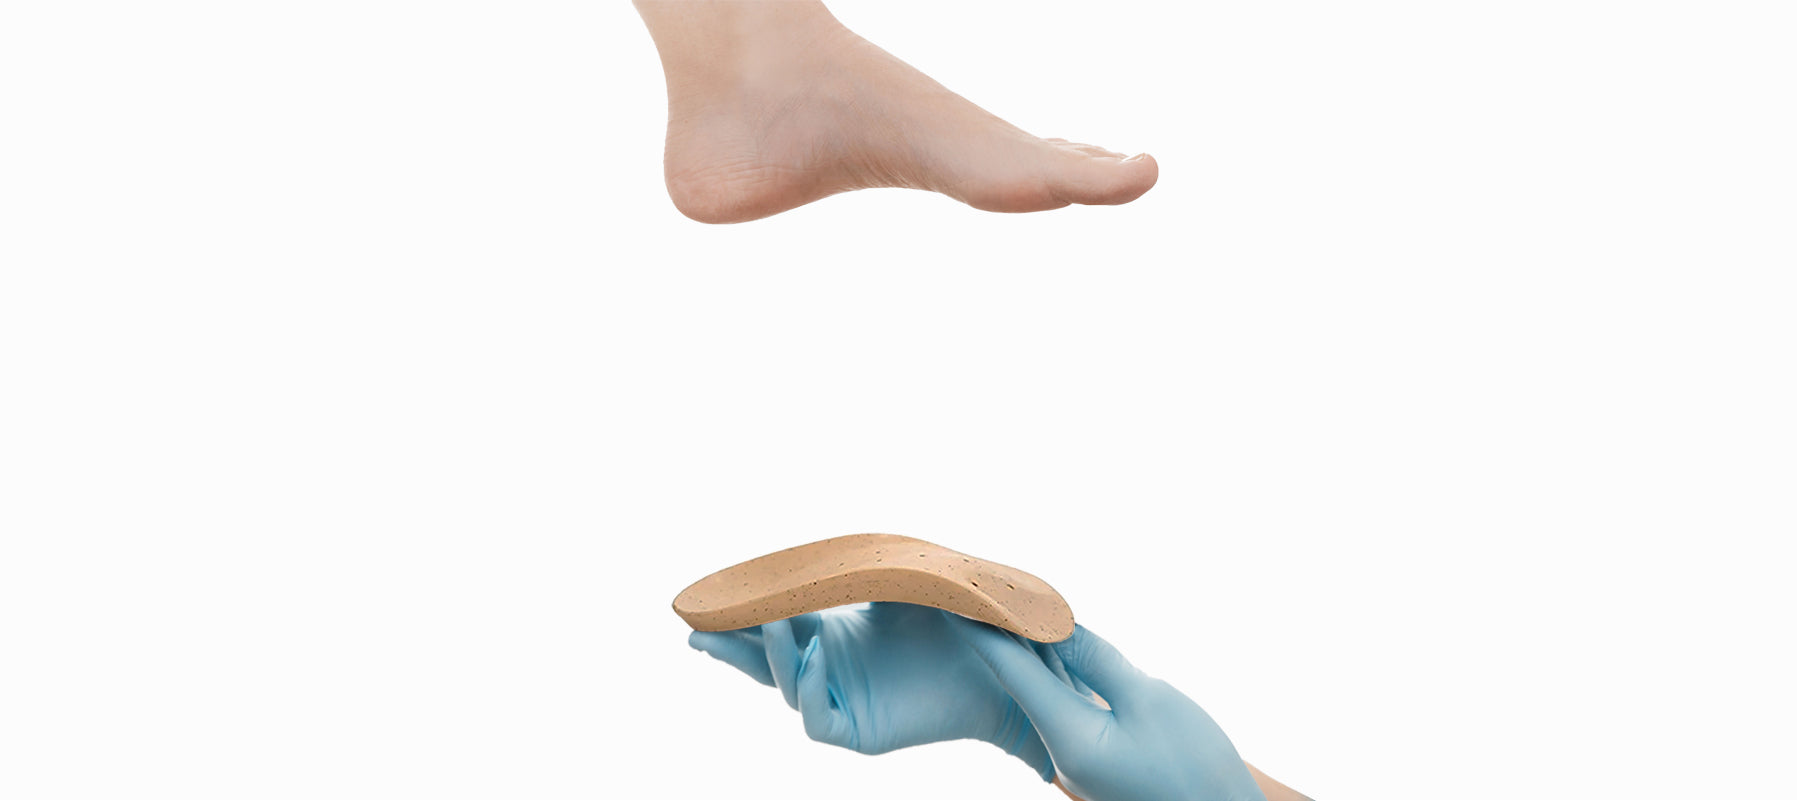 Foot Chair Orthotics - Arch Supports for Plantar Fasciitis and more